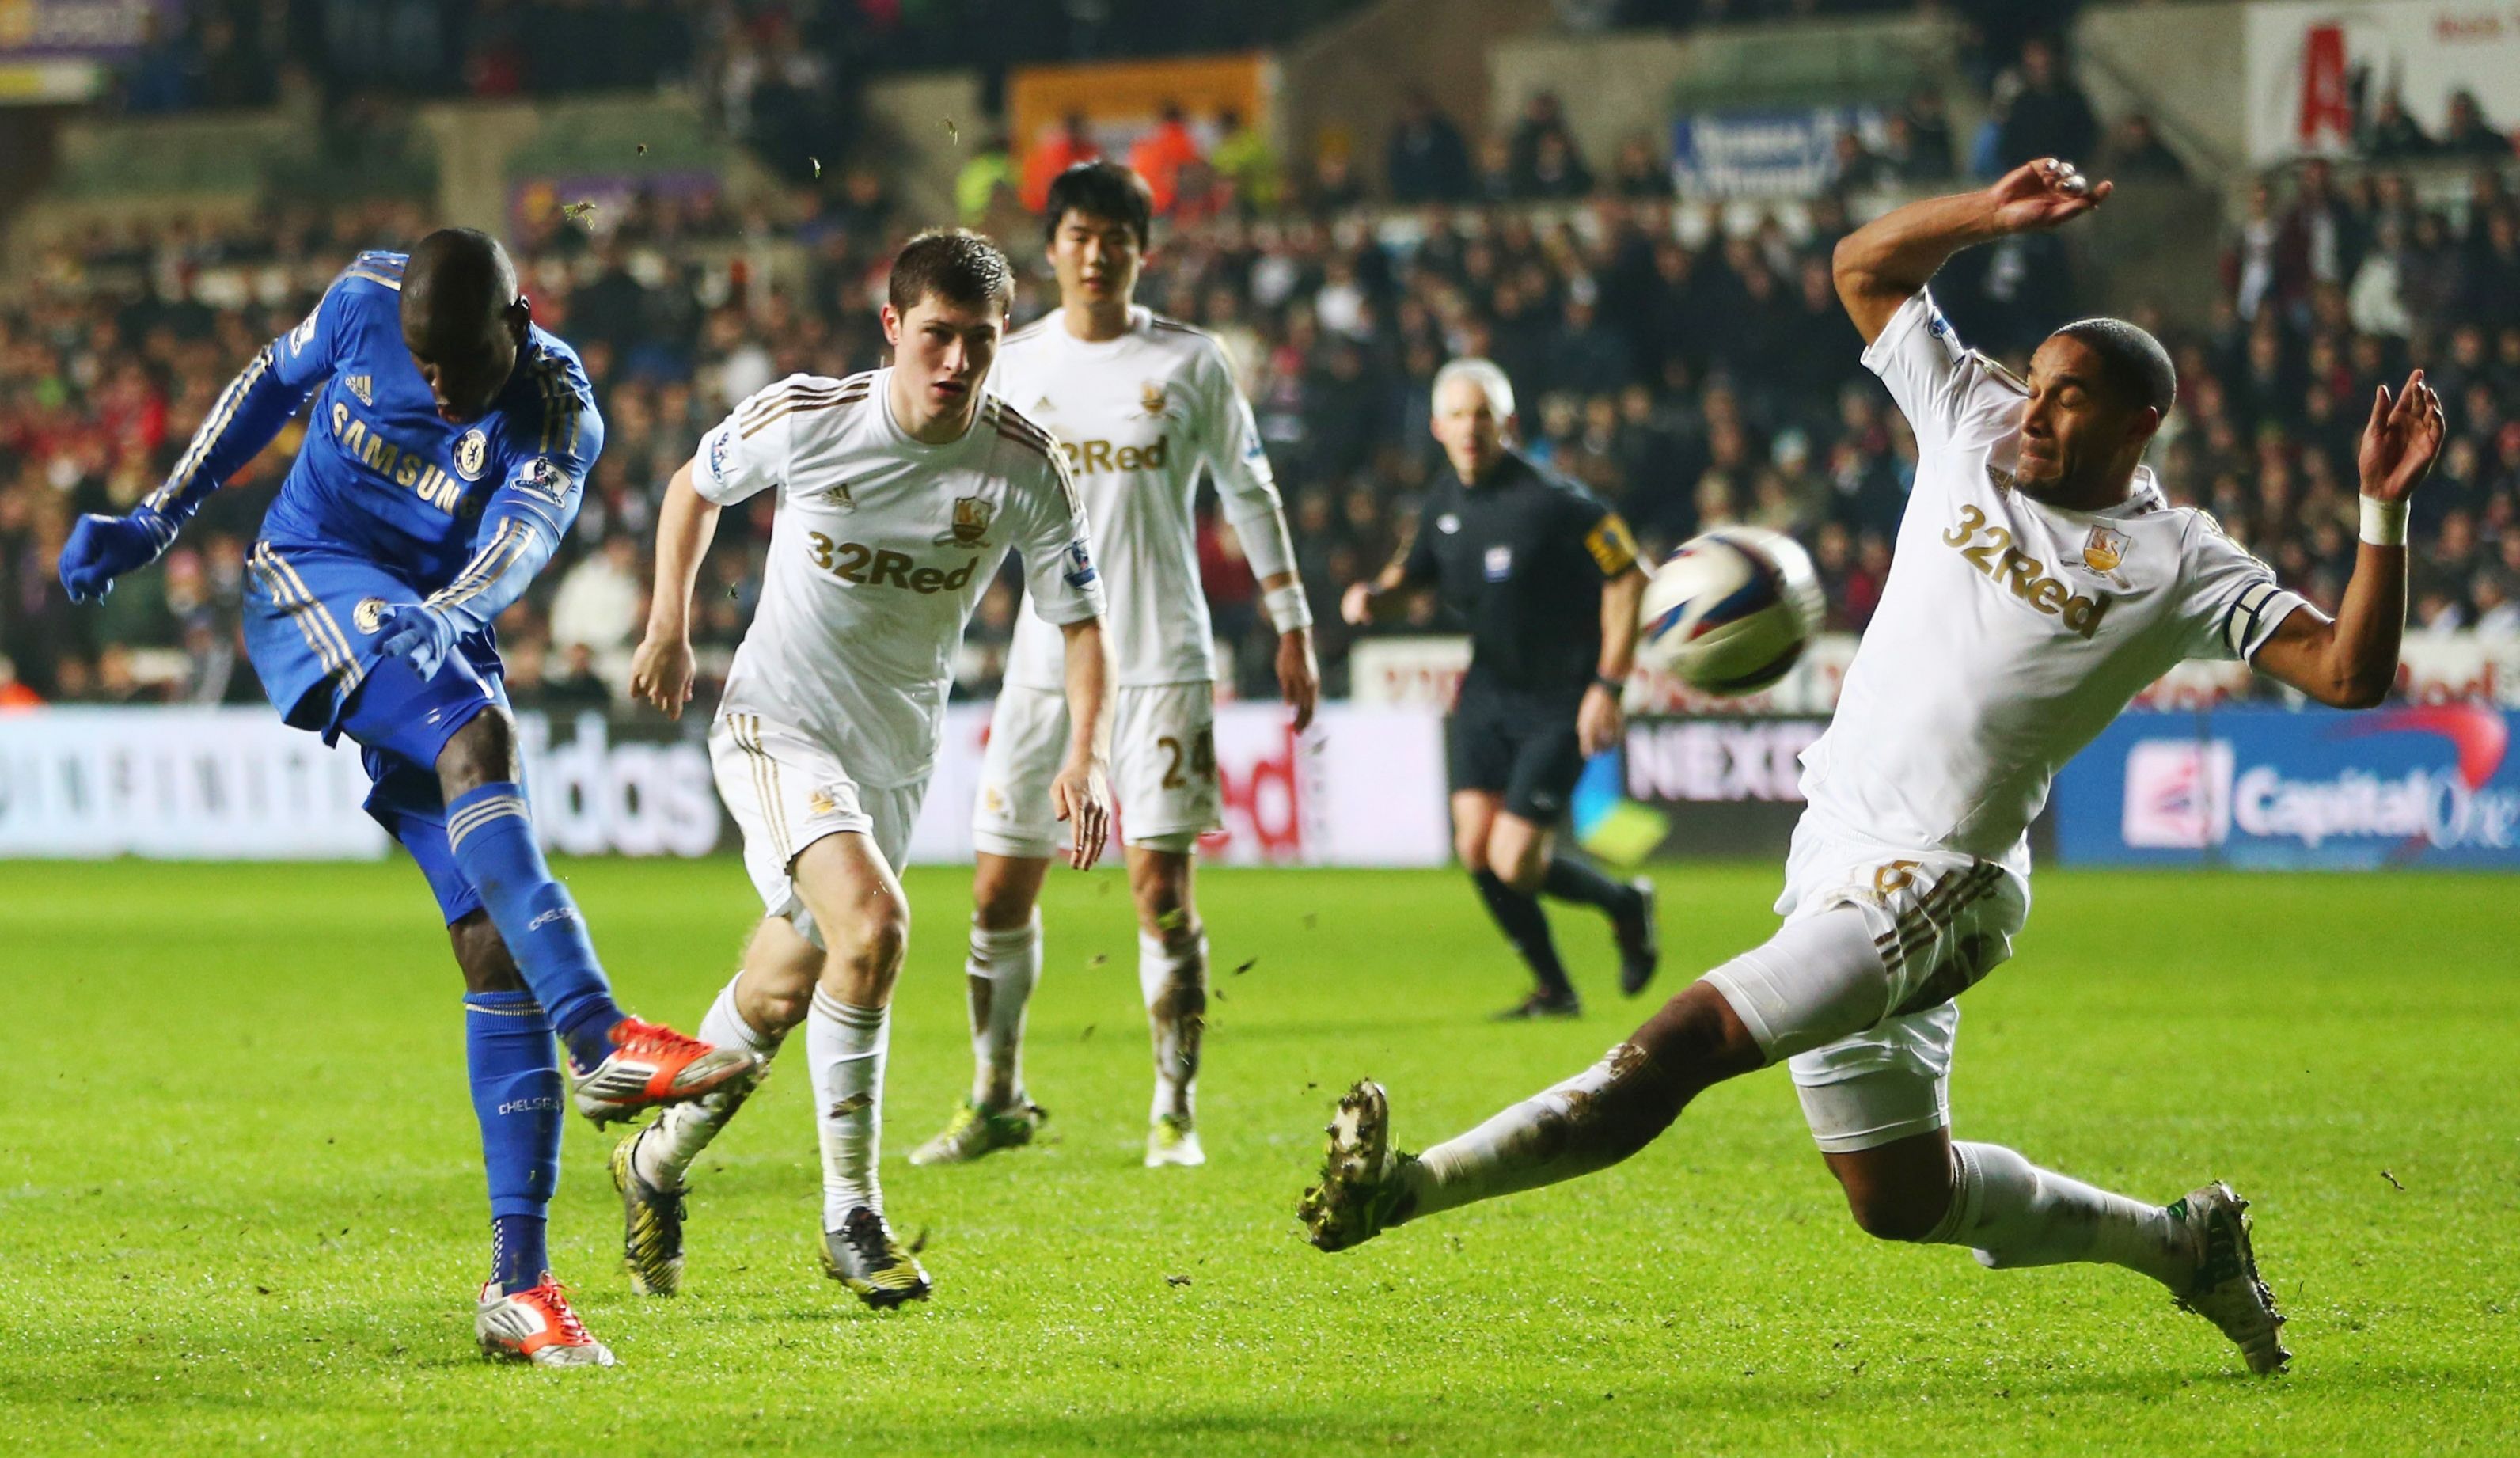 Football club Swansea City wallpapers and images - wallpapers ...